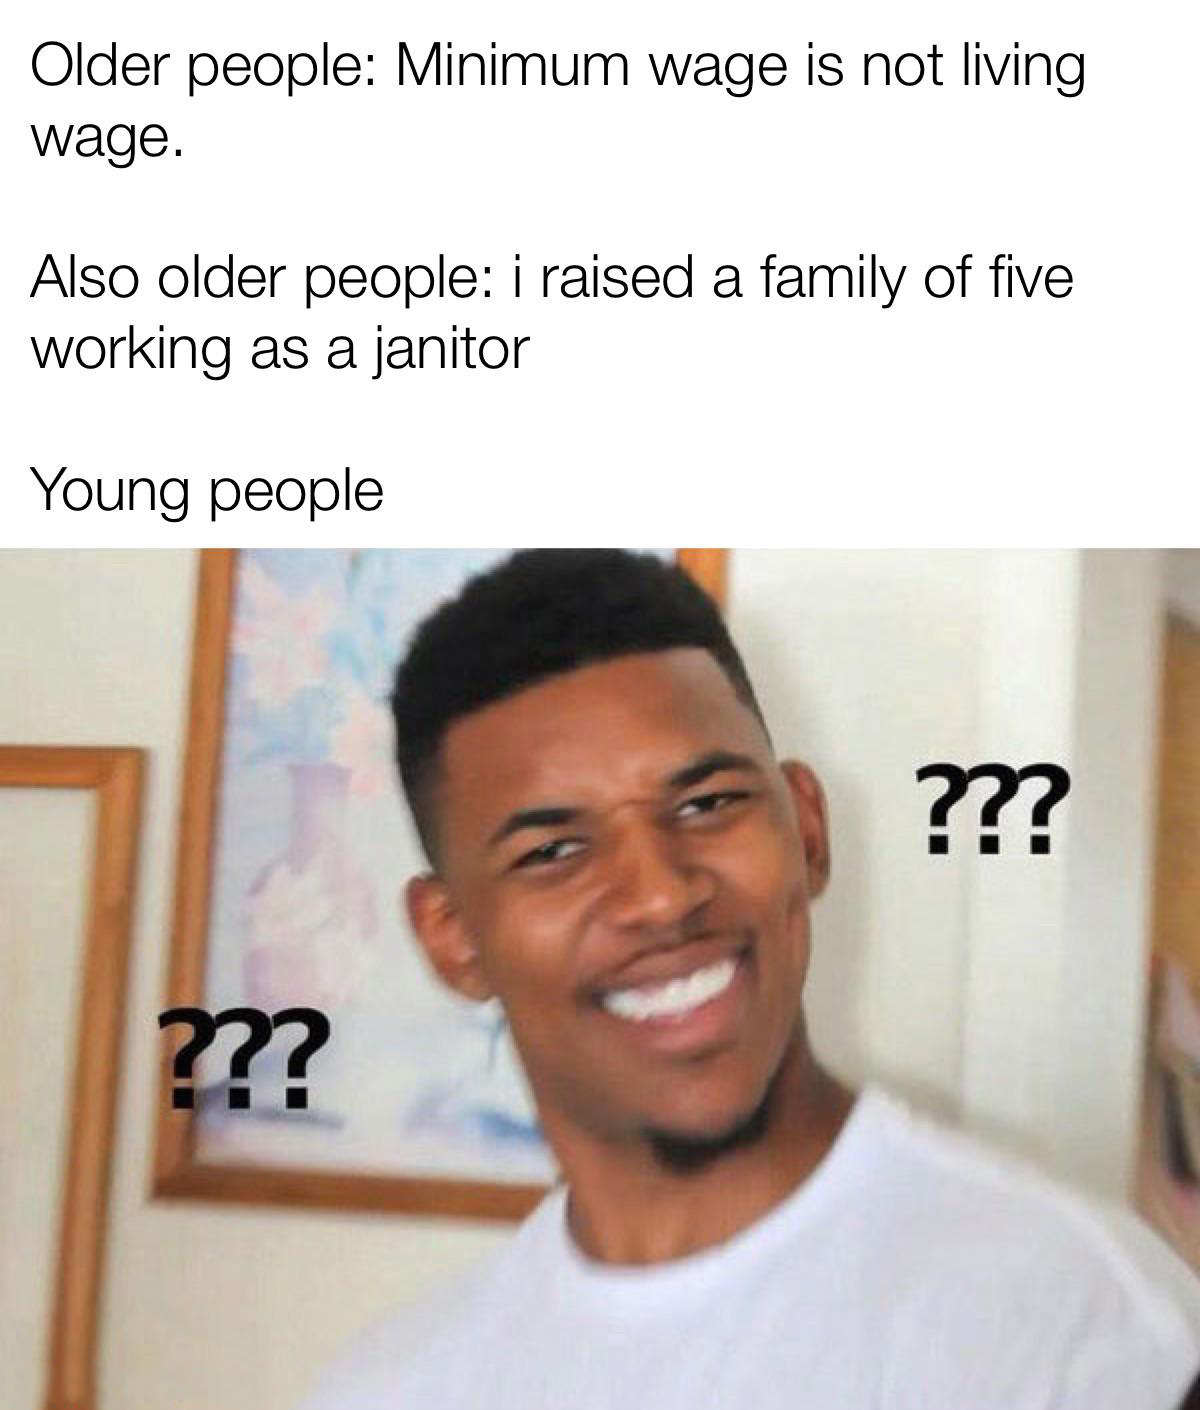 funny memes - dank memes - meme history bible - Older people Minimum wage is not living wage. Also older people i raised a family of five working as a janitor Young people ???? ????